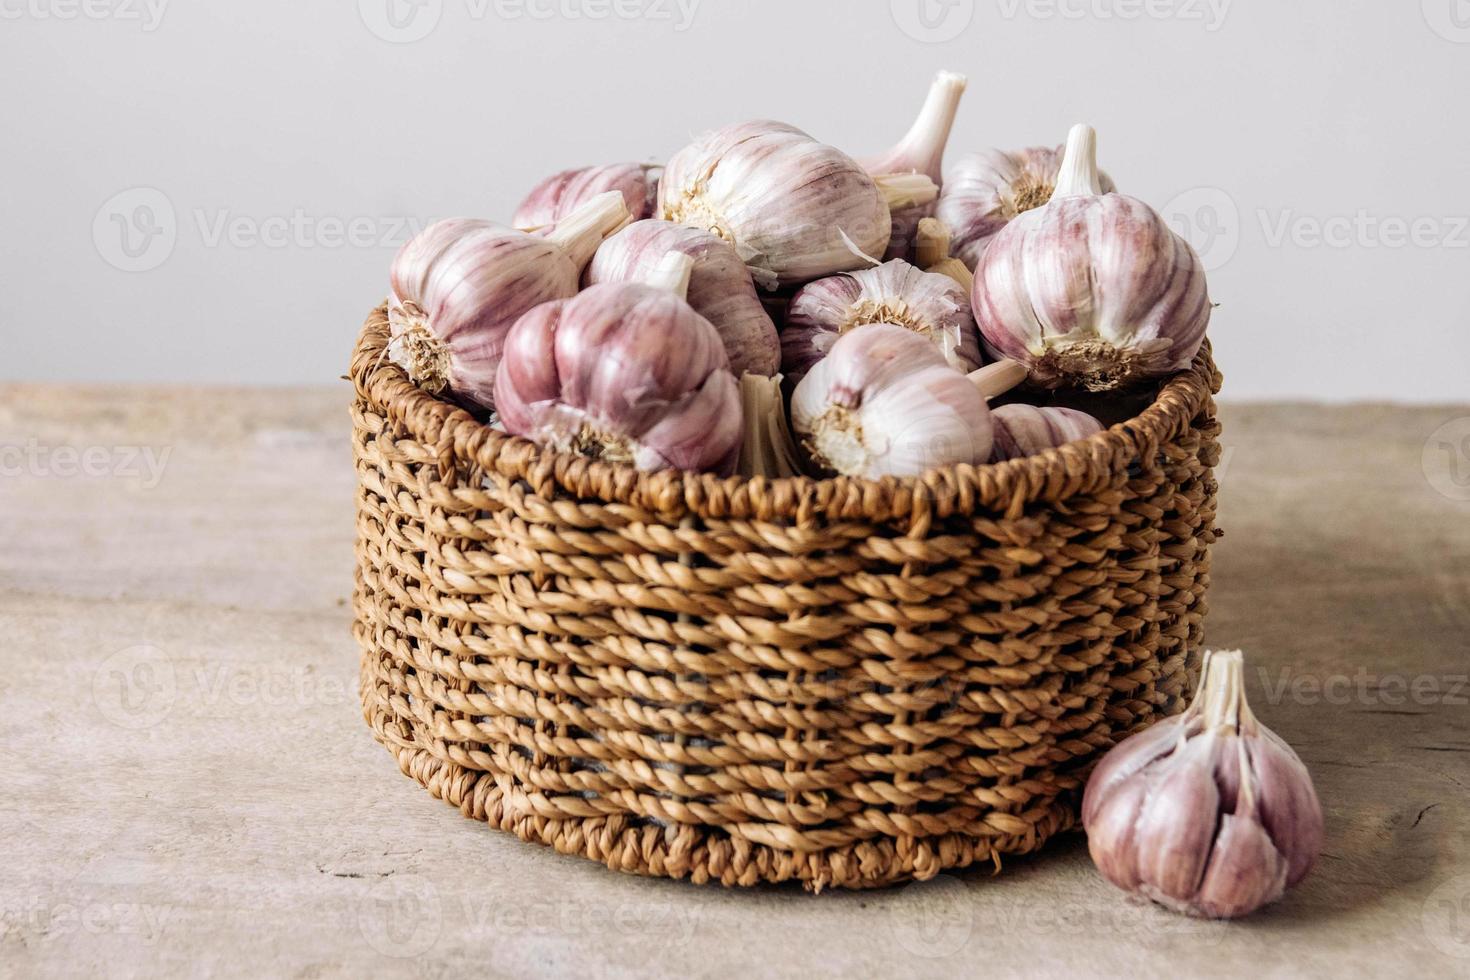 Garlic in a wicker basket on a wooden table background photo